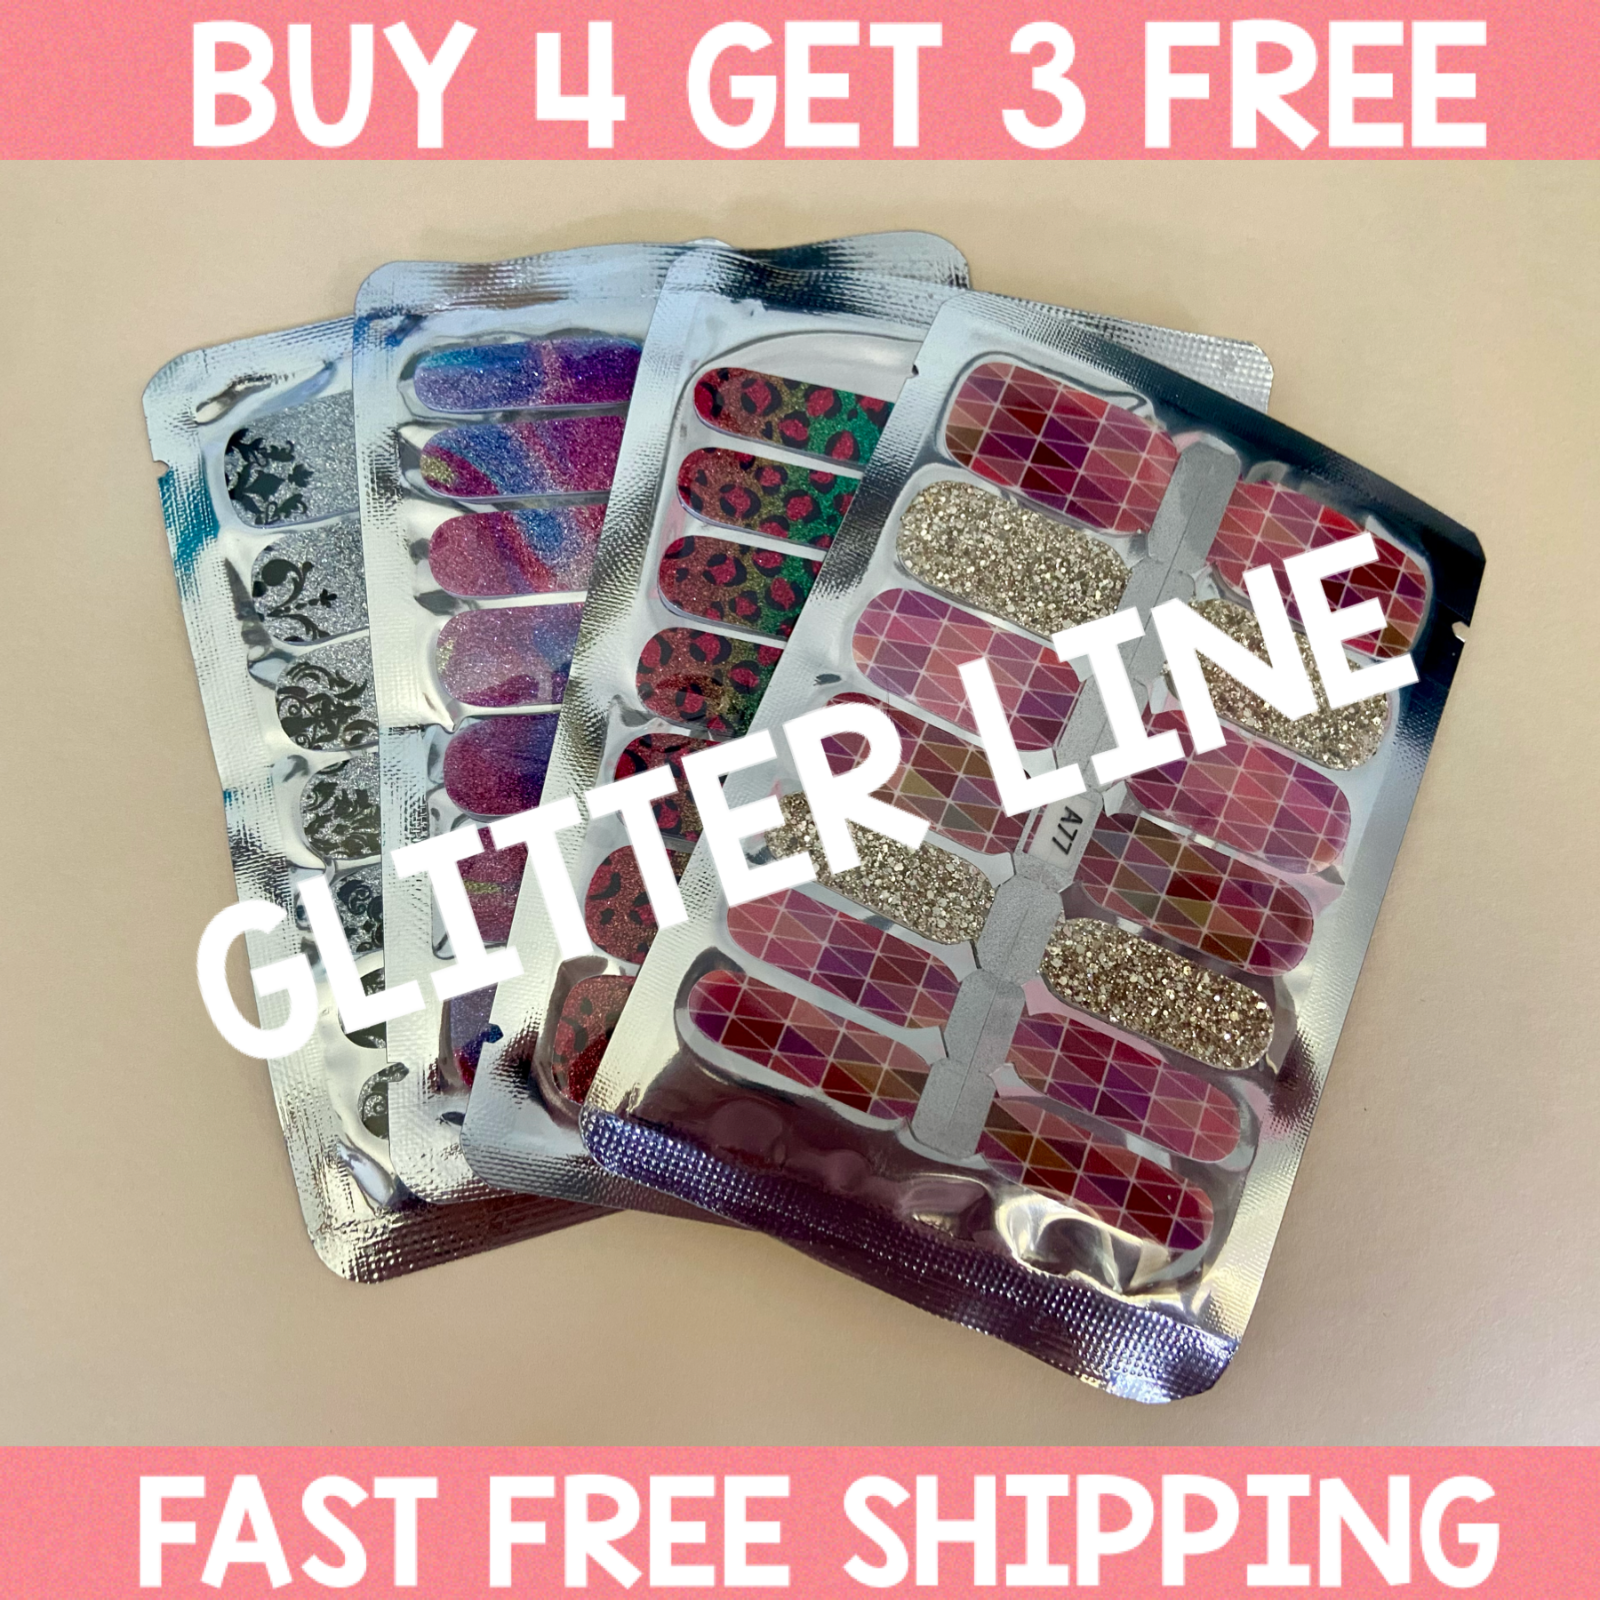 Glitter Color Nail Polish Strips - BUY 4 GET 3 FREE - FREE SHIPPING